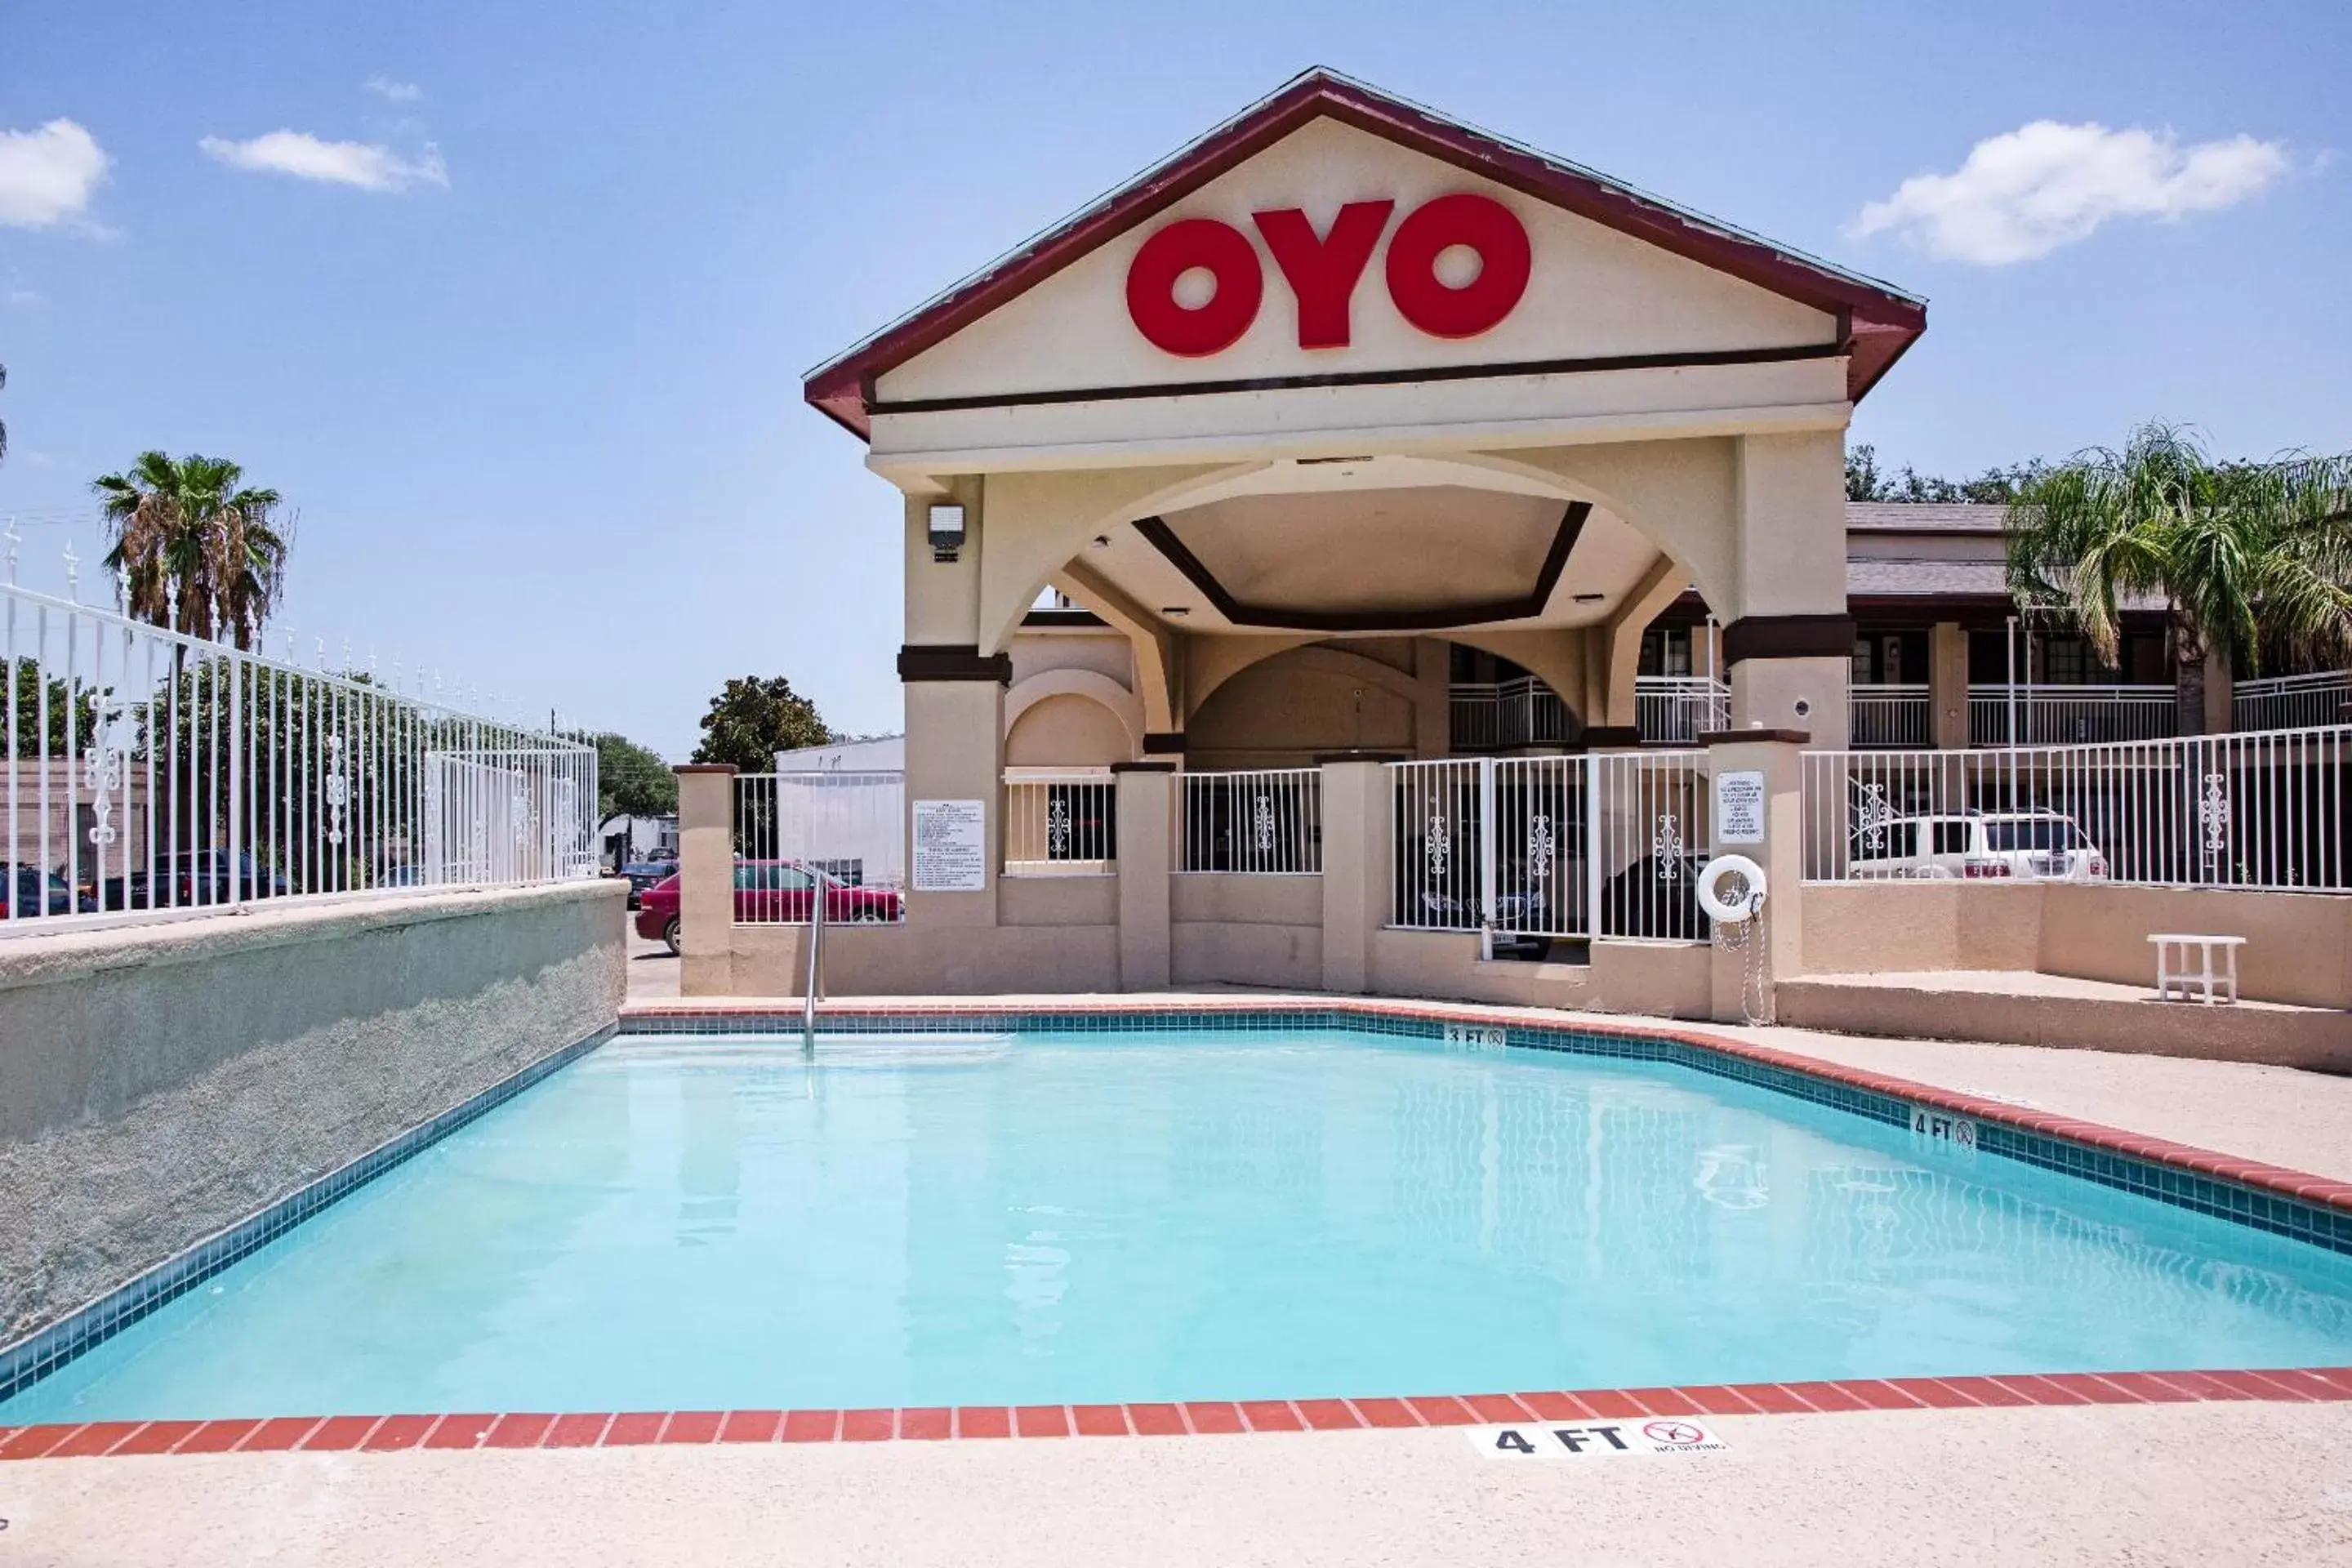 Property building, Swimming Pool in OYO Hotel McAllen Airport South